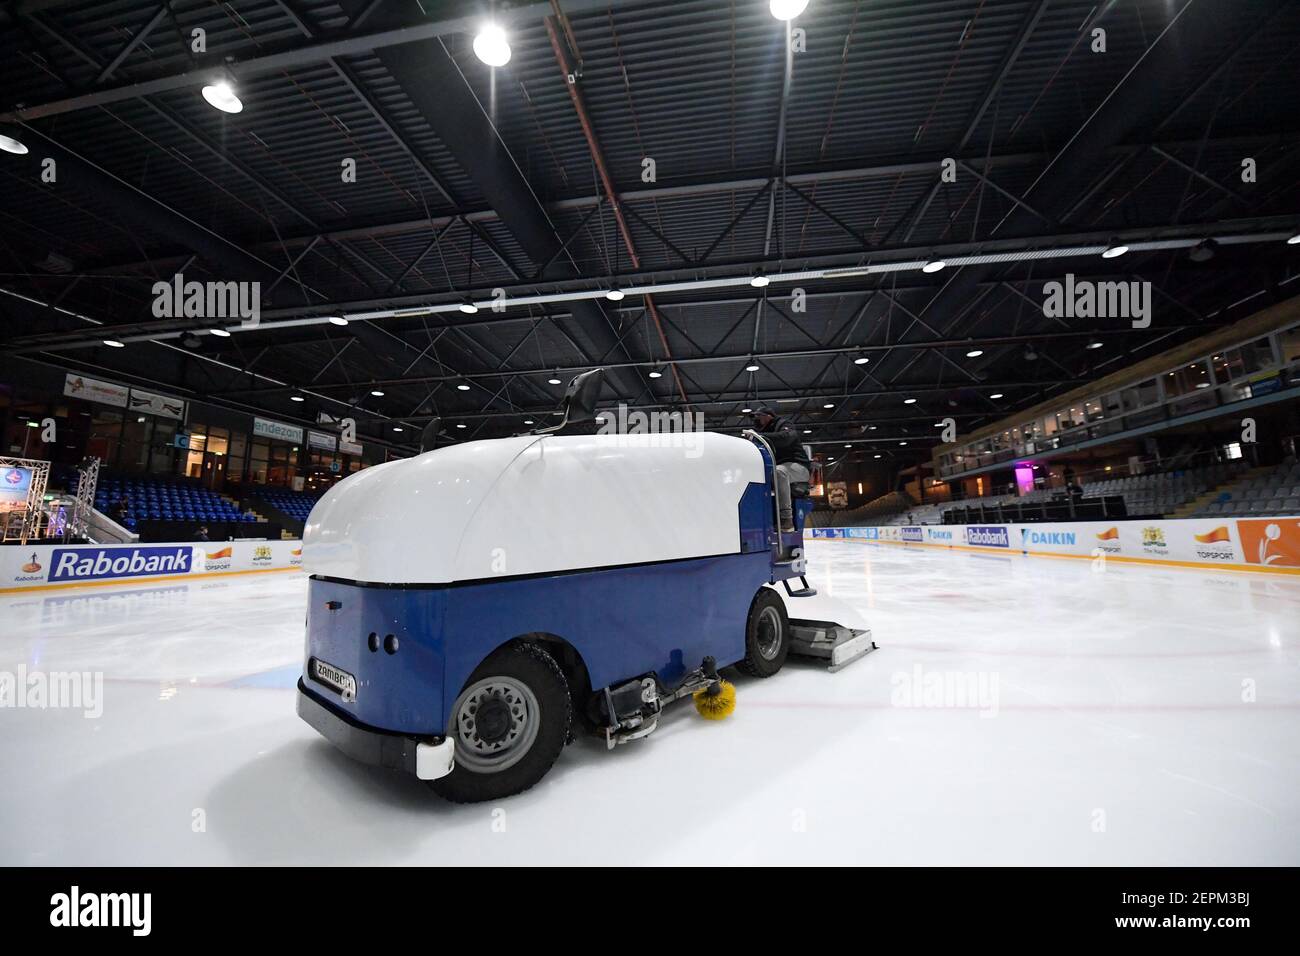 THE HAGUE, NETHERLANDS - FEBRUARY 27: An ice resurfacing machine cleans the ice during the Challenge Cup 2021 match between  and  at De Uithof on Febr Stock Photo